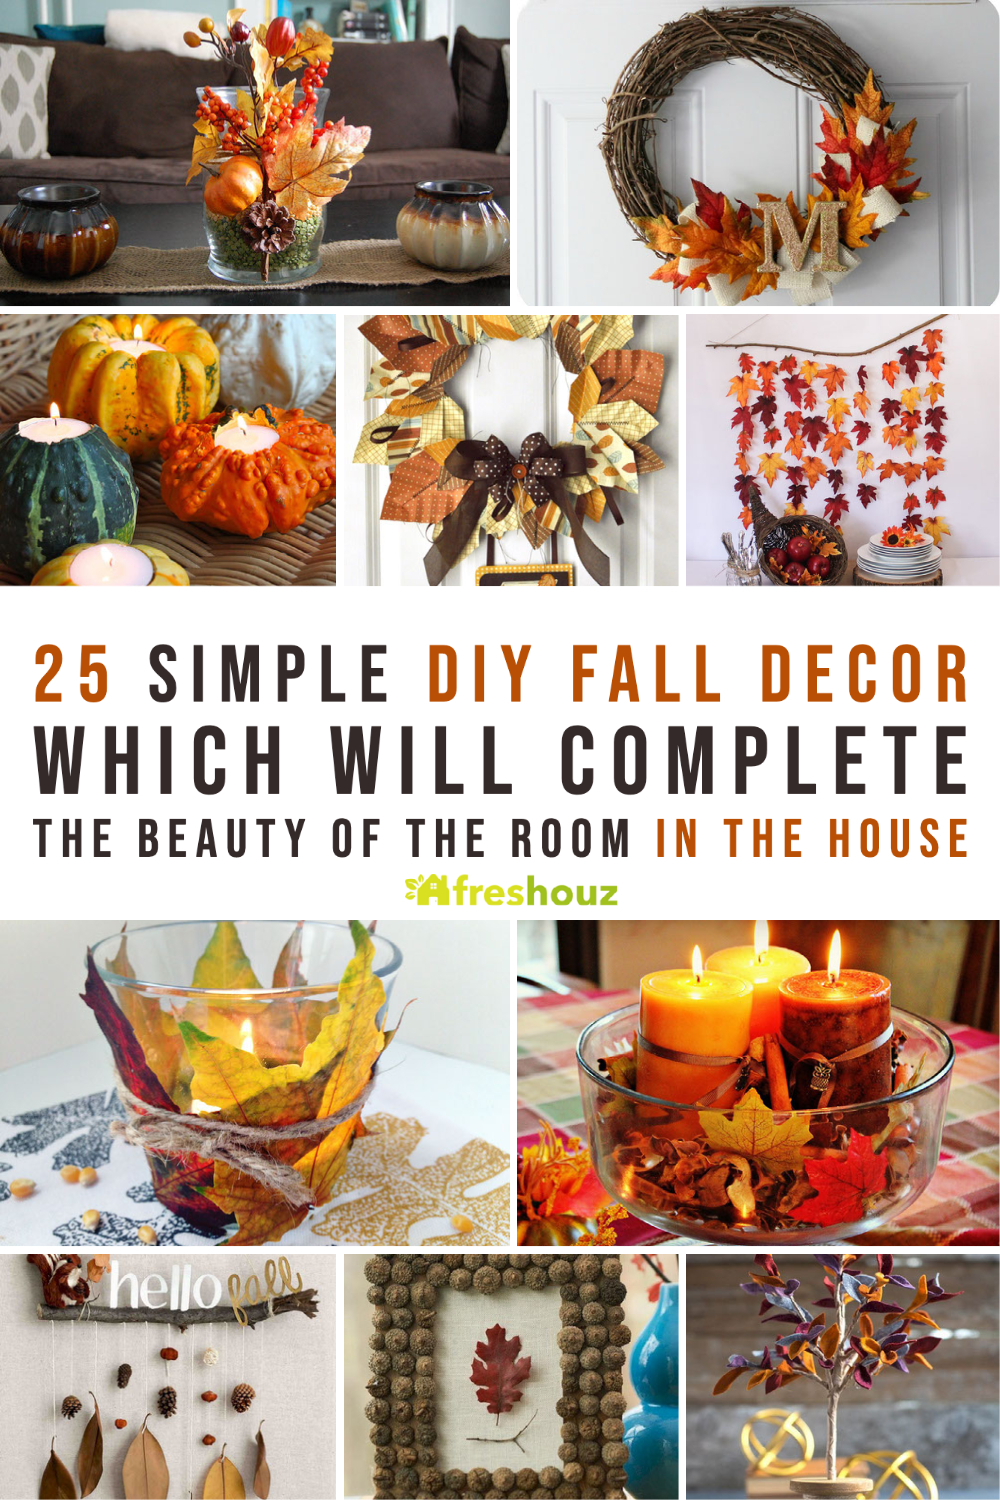 25 Simple DIY Fall Decor Which Will Complete The Beauty Of The Room In The House